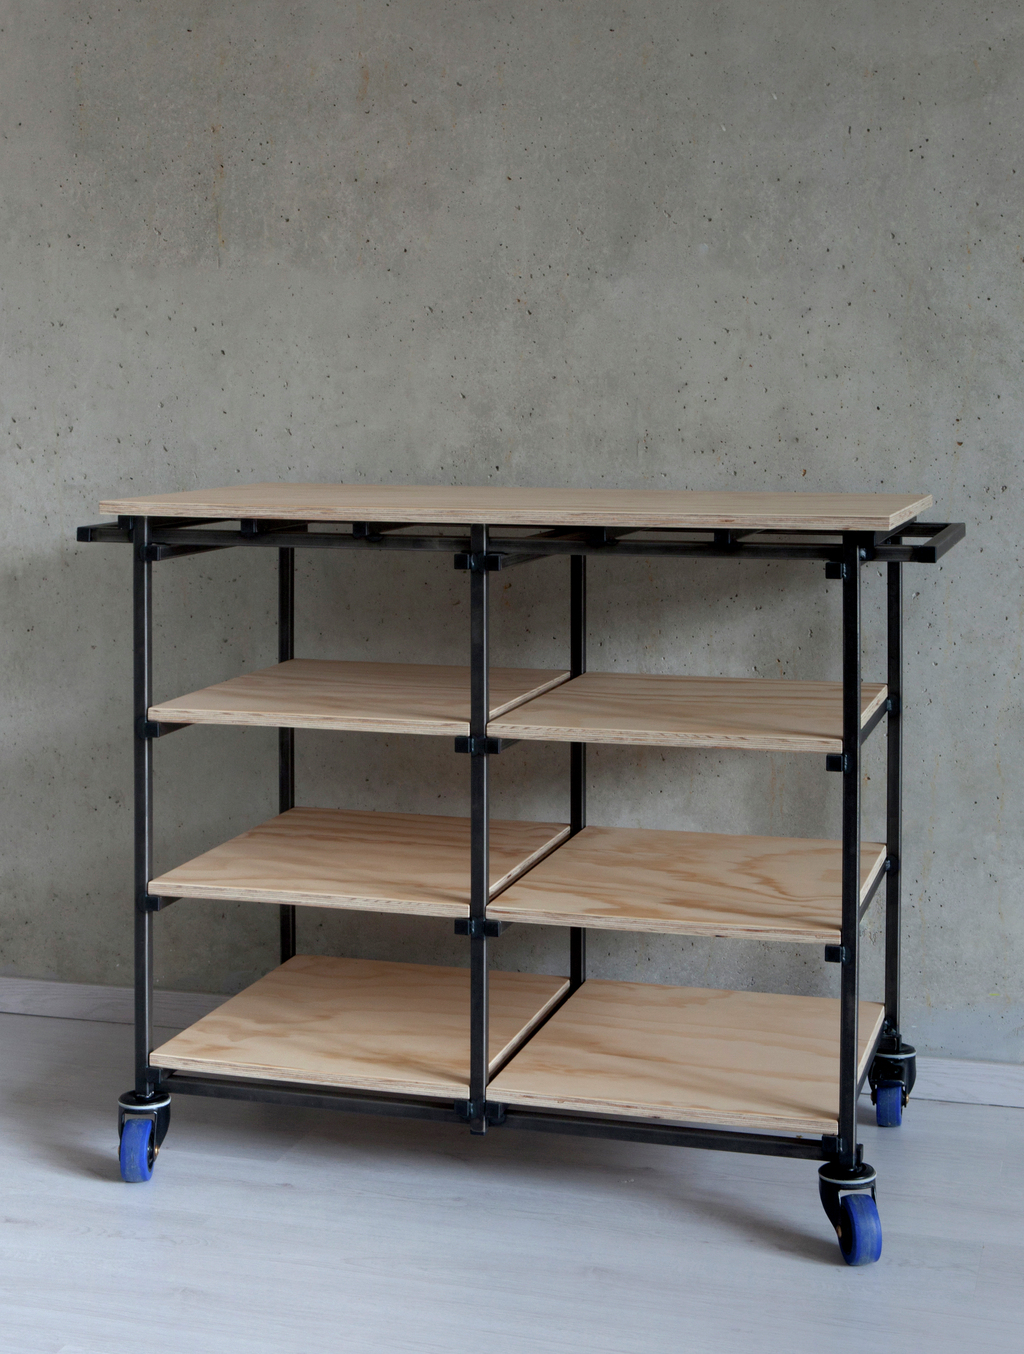 Trolley on wheels made from metal bars and plywood shelves with transparent coating.